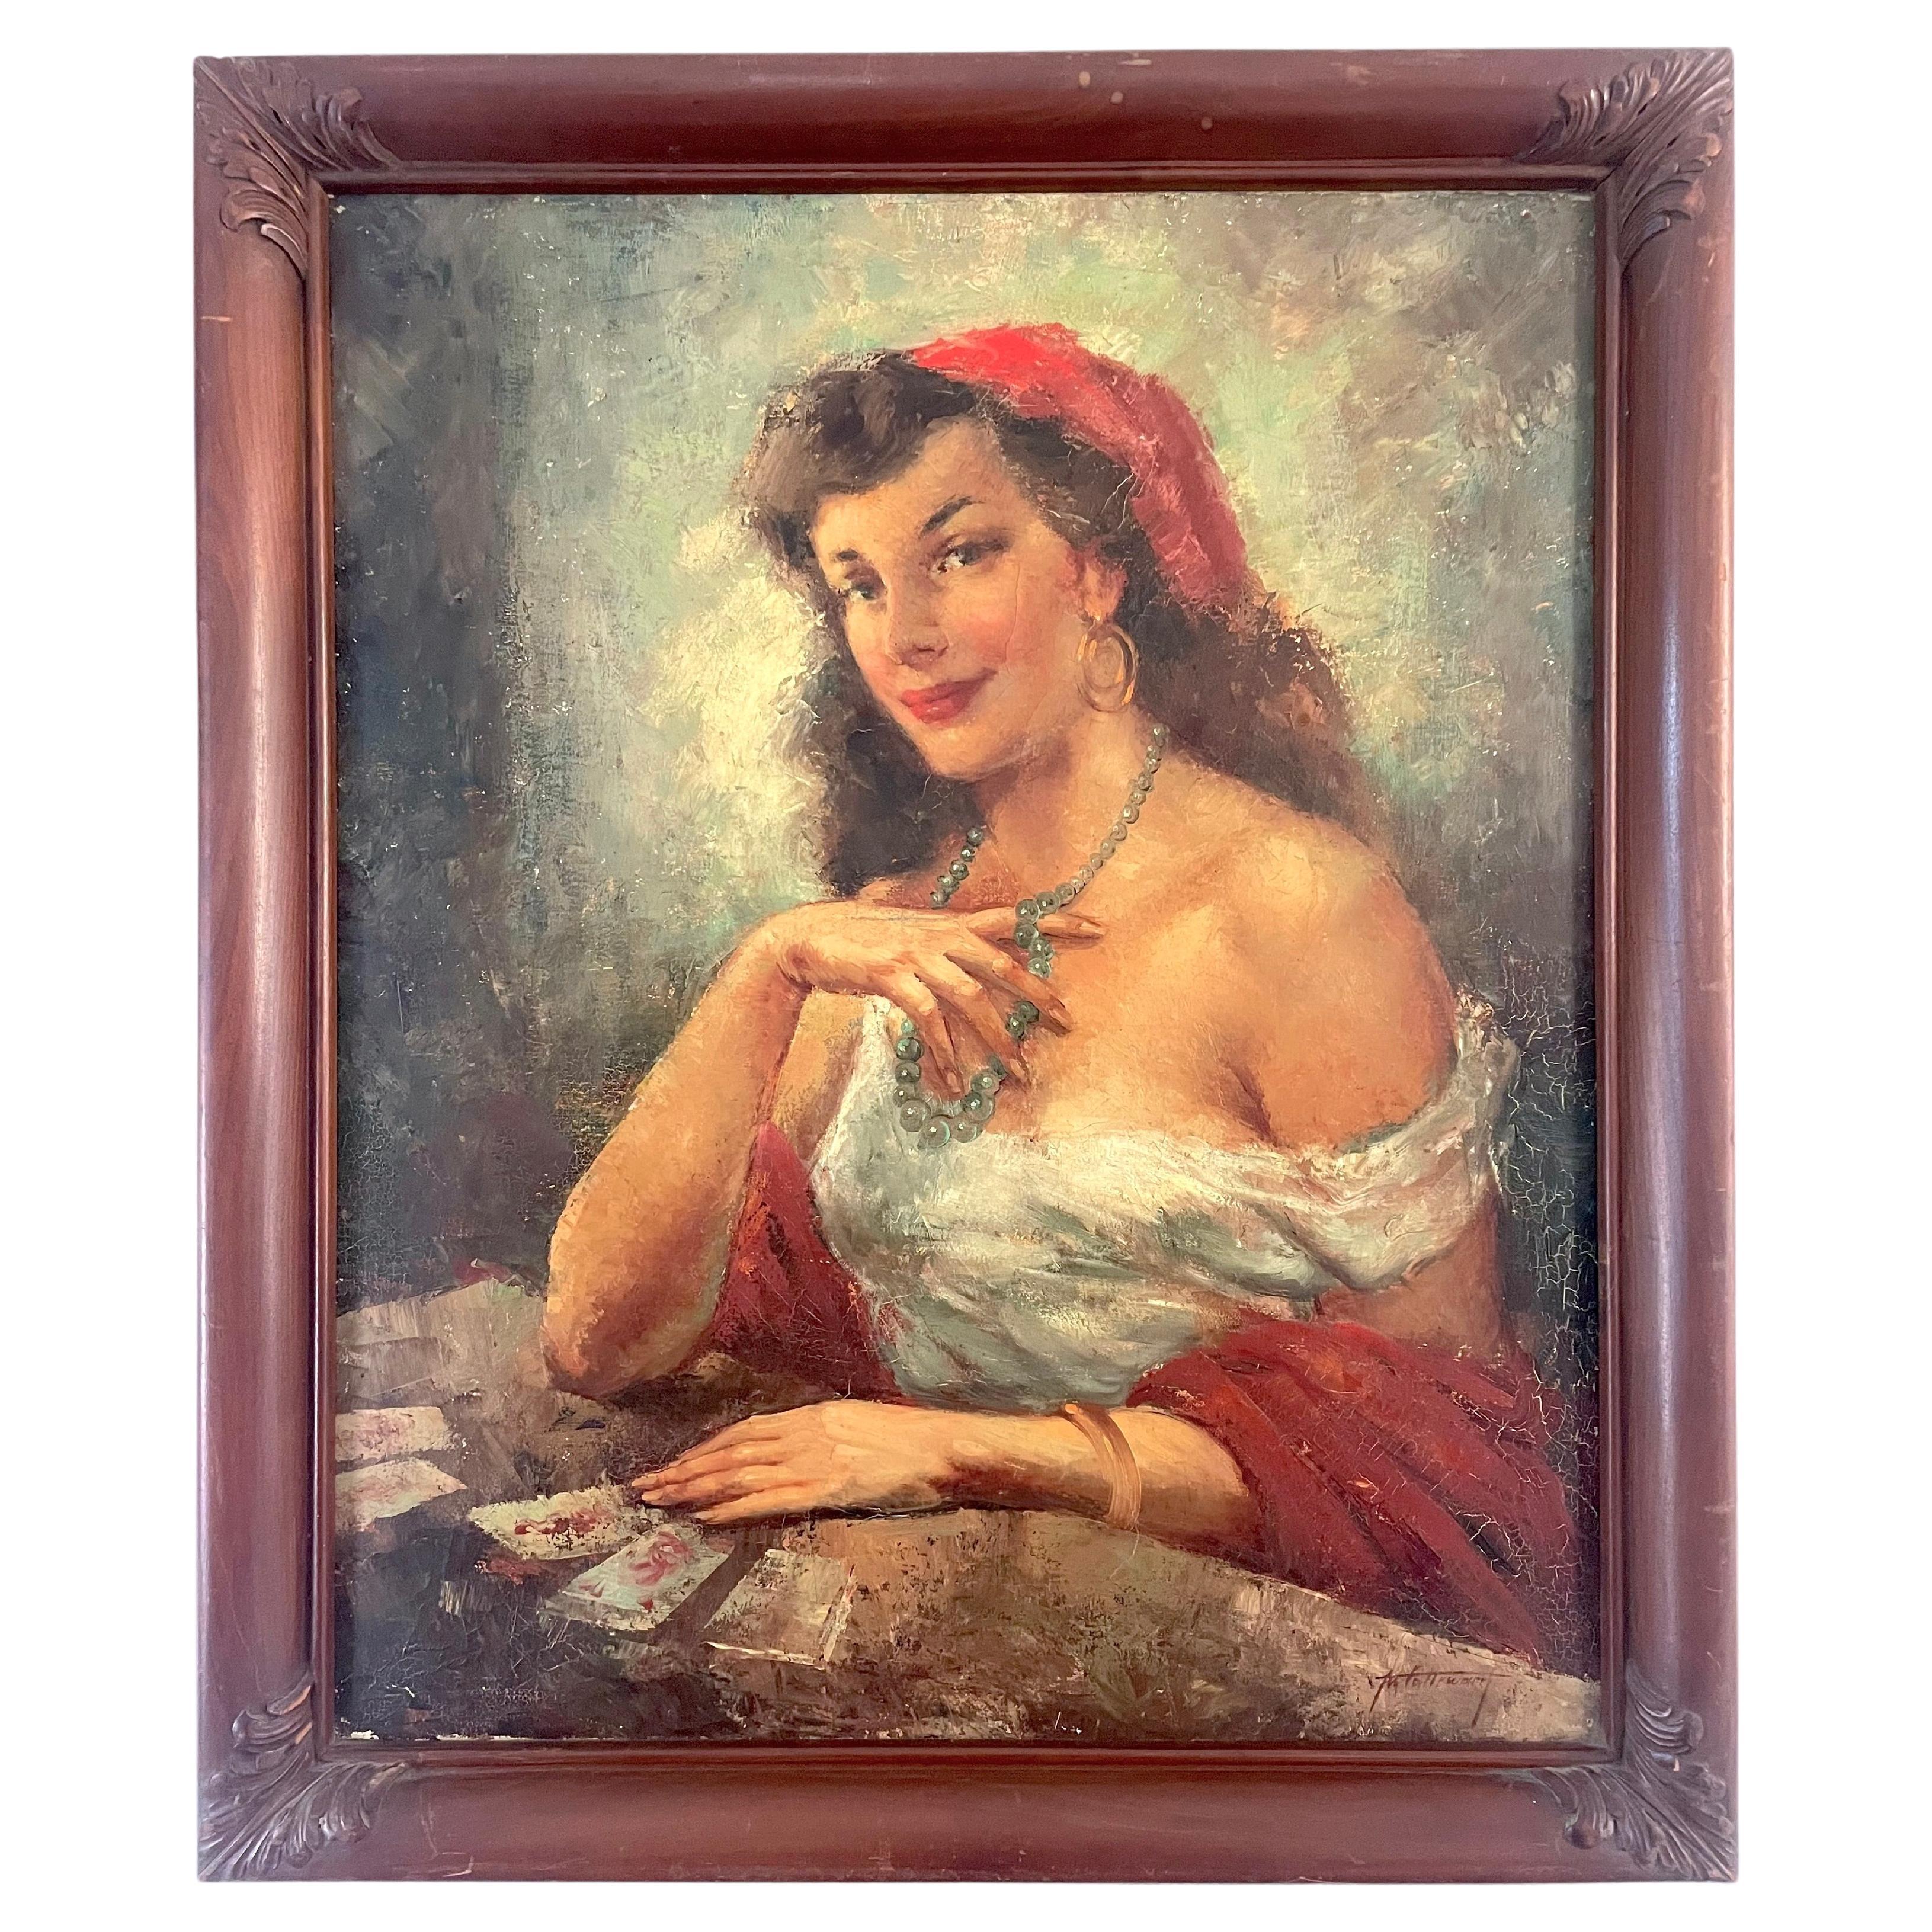 Framed Painting Representing Bohemian Gypsy Cartomancer, Signed Callewaert, 1940 For Sale